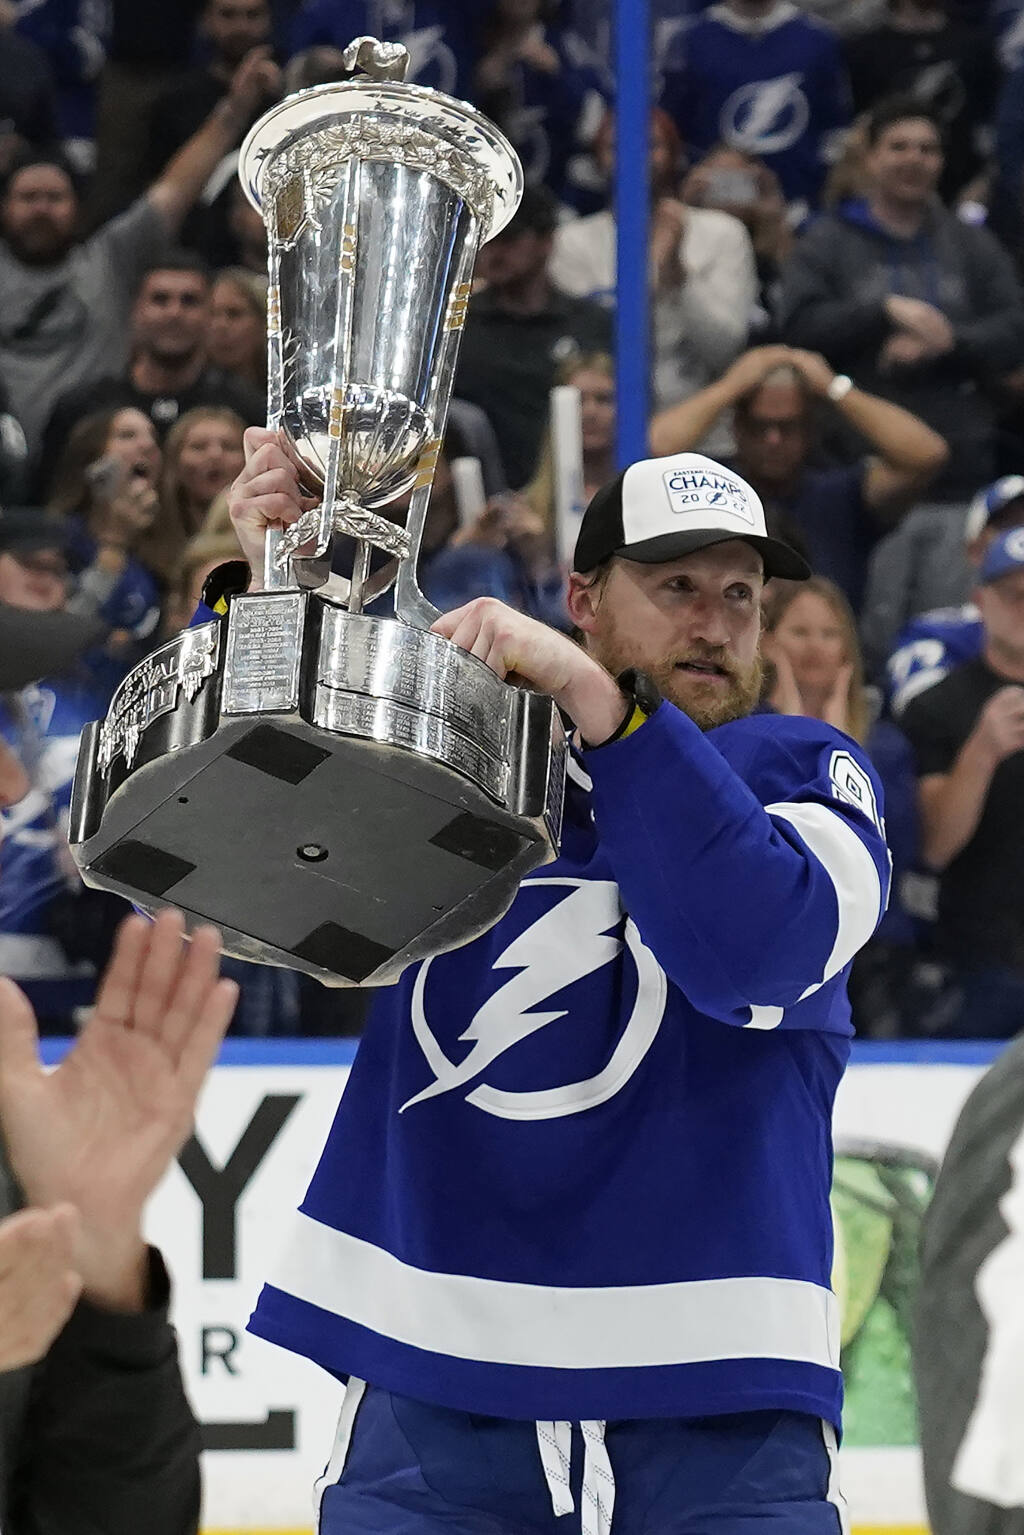 2022 Stanley Cup Final - Pat Maroon is the Tampa Bay Lightning's